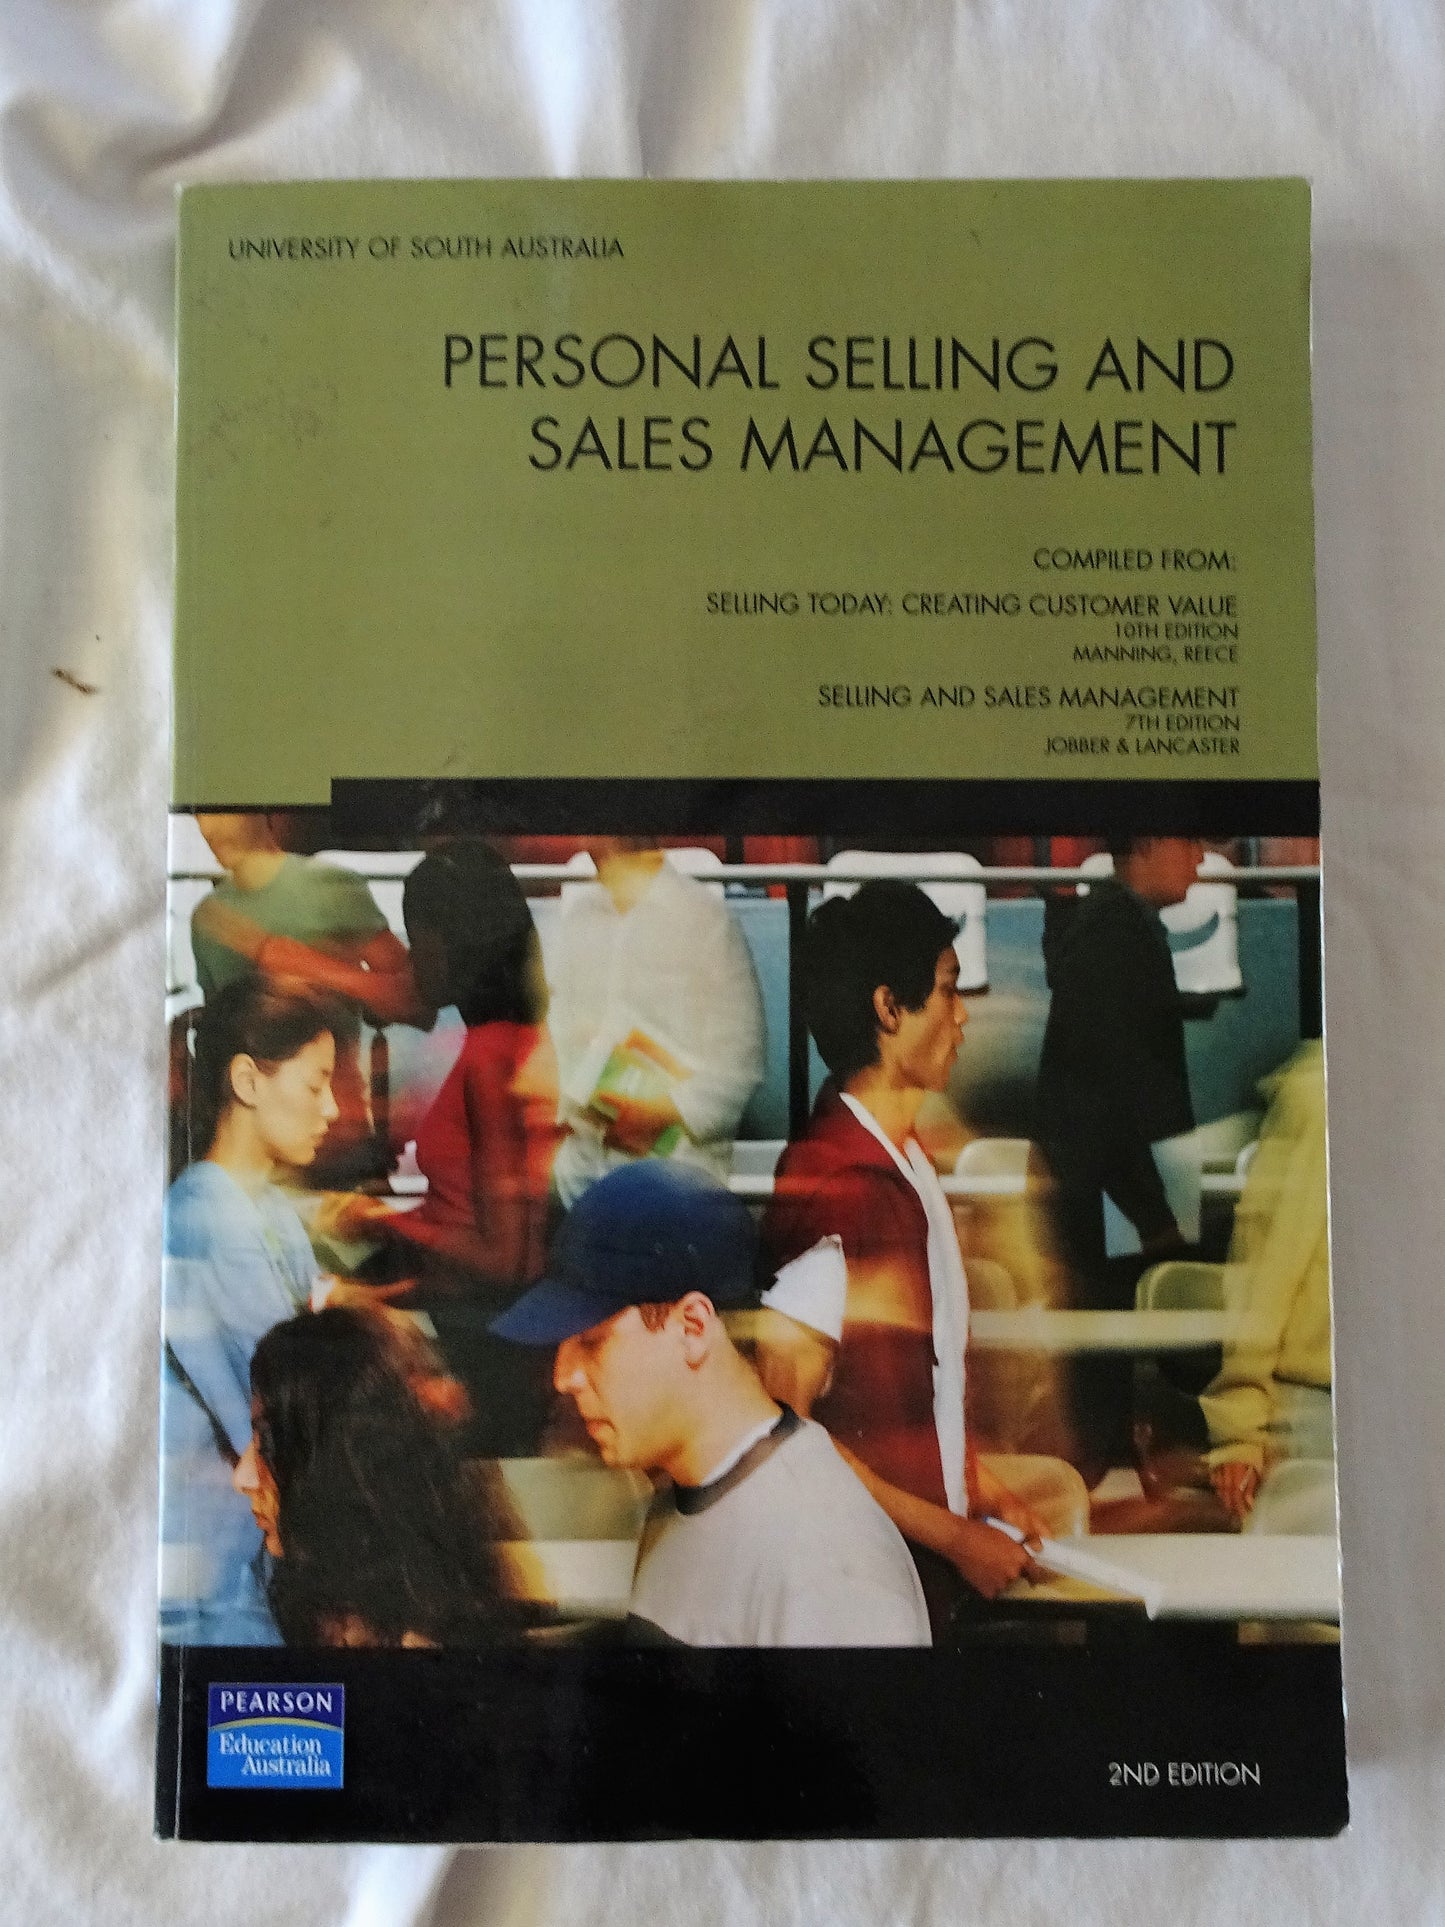 Personal Selling and Sales Management by University of South Australia